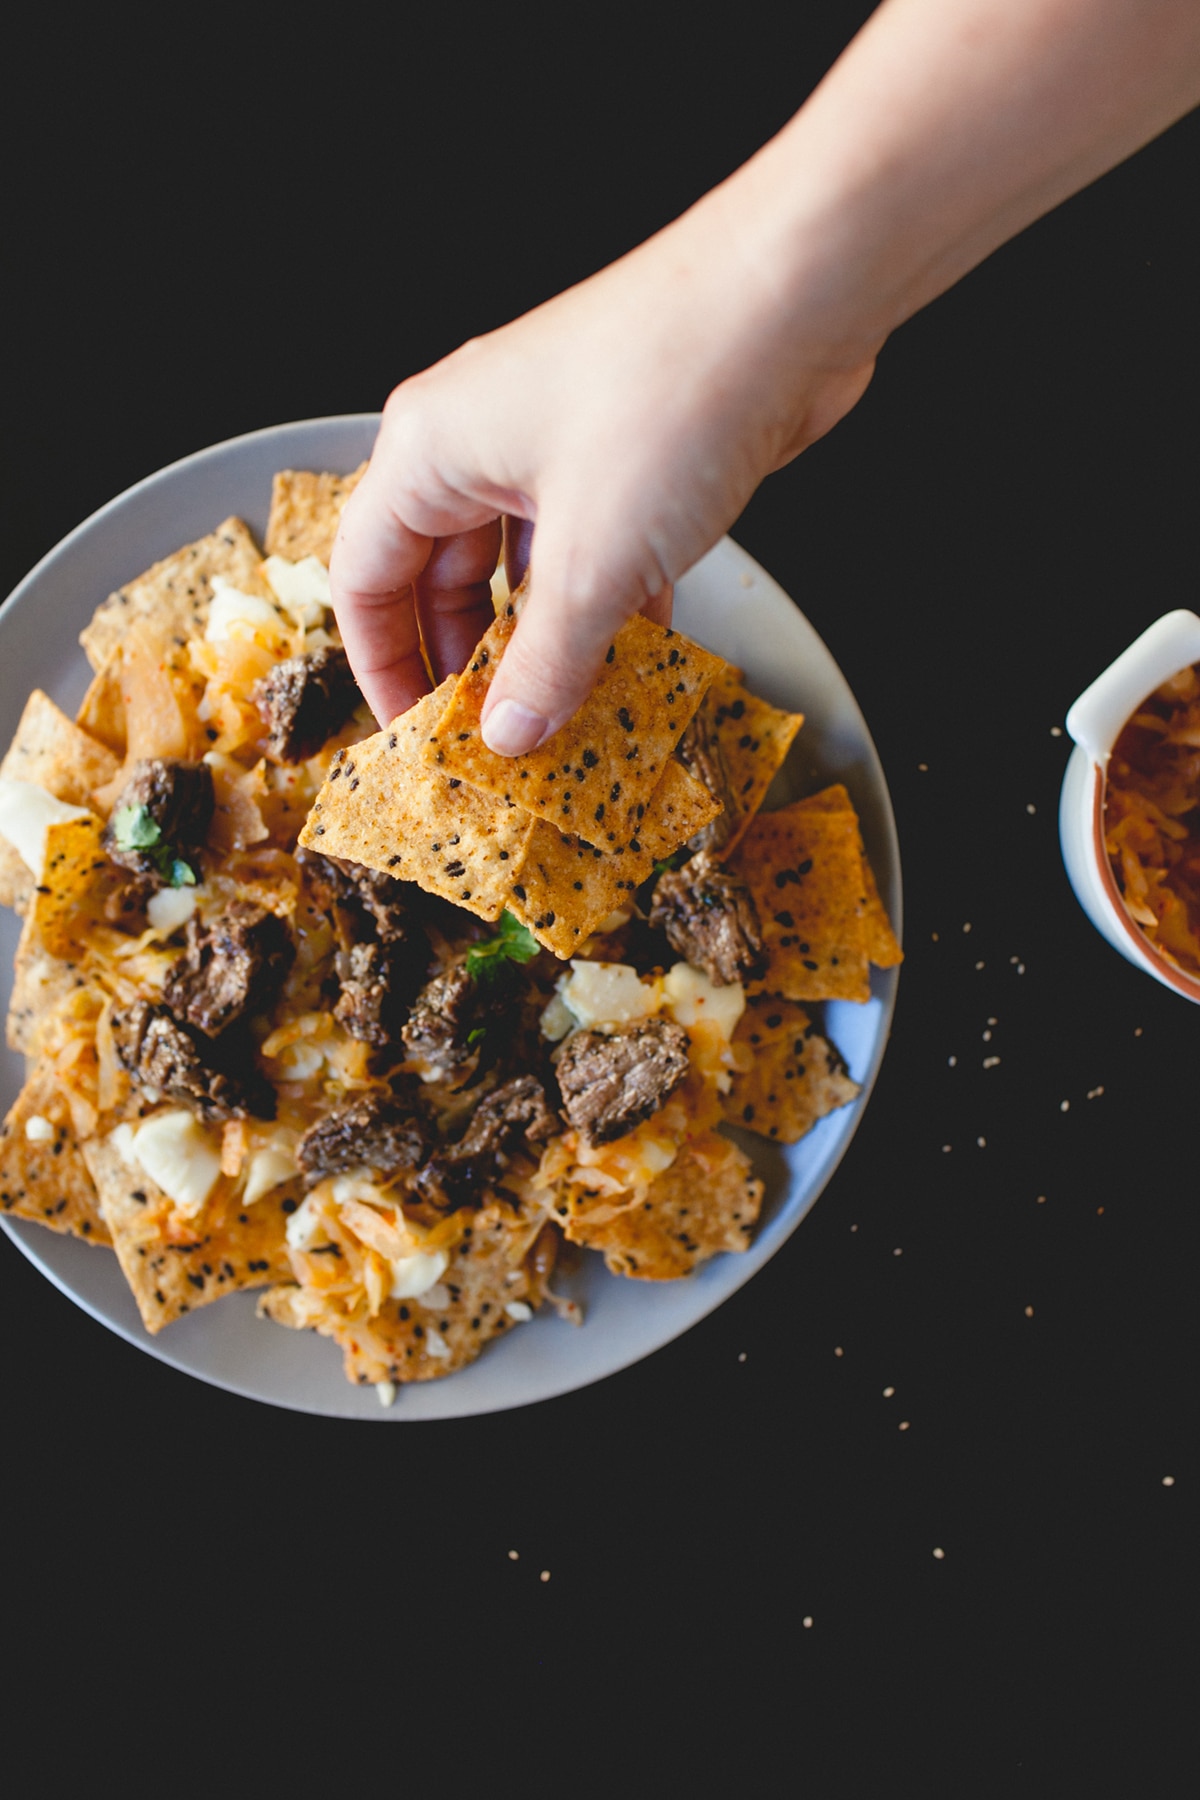 sriracha chips are a game changer for game day nachos! get the recipe on coco kelley